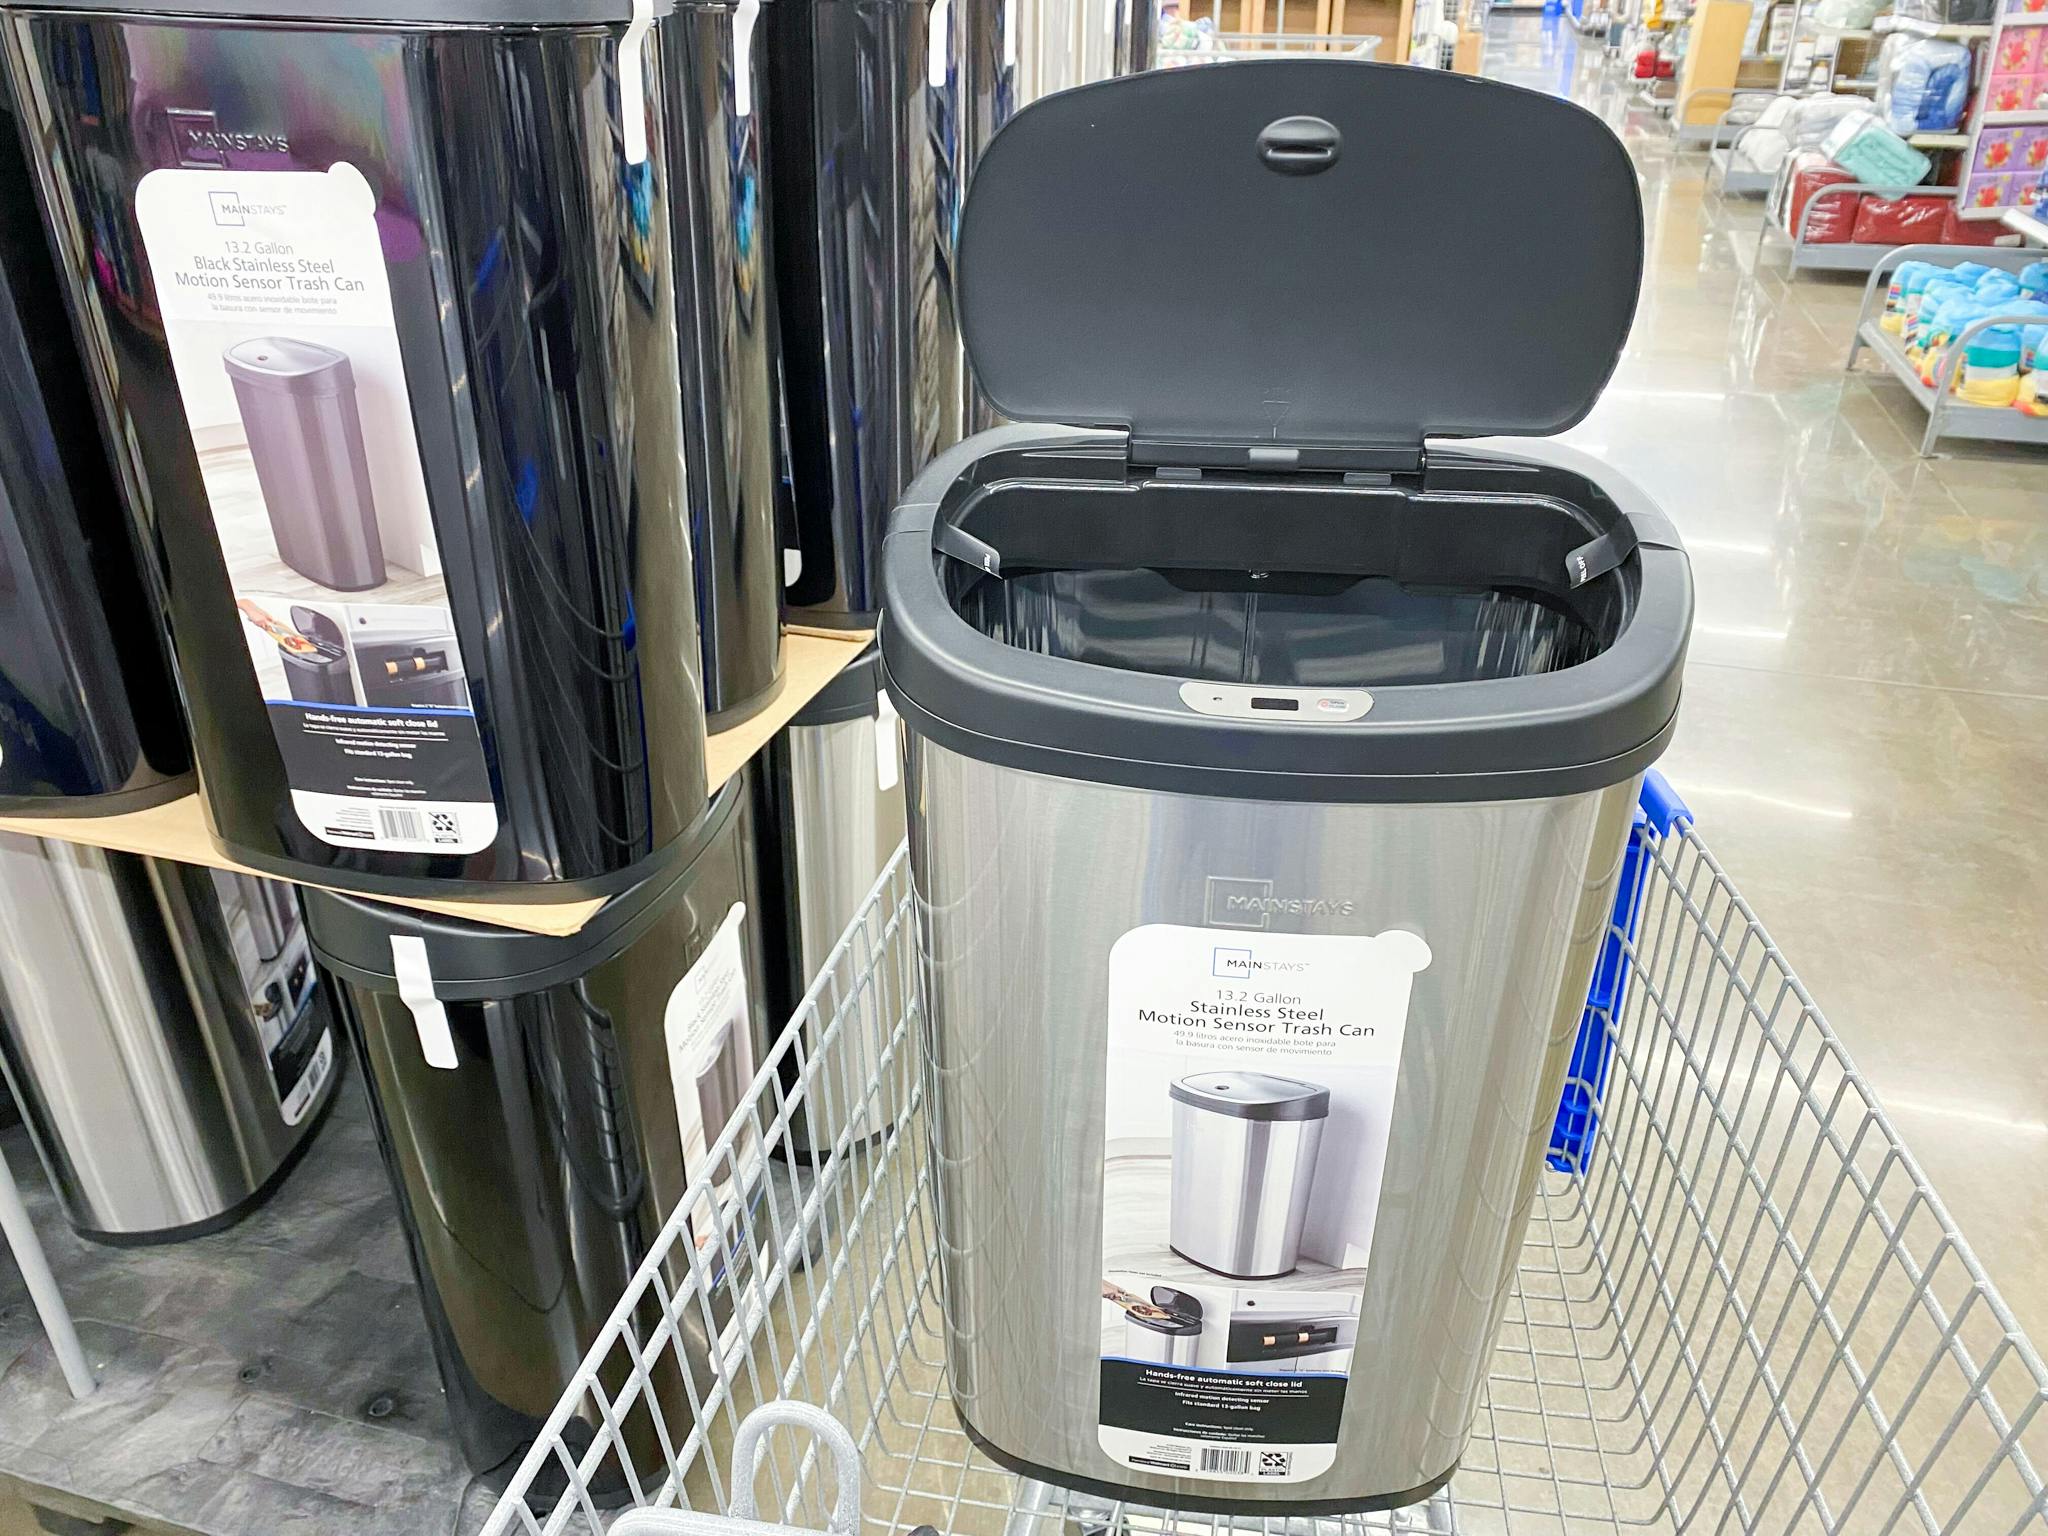 Mainstays Stainless Steel Motion Sensor Garbage Can in Walmart shopping cart